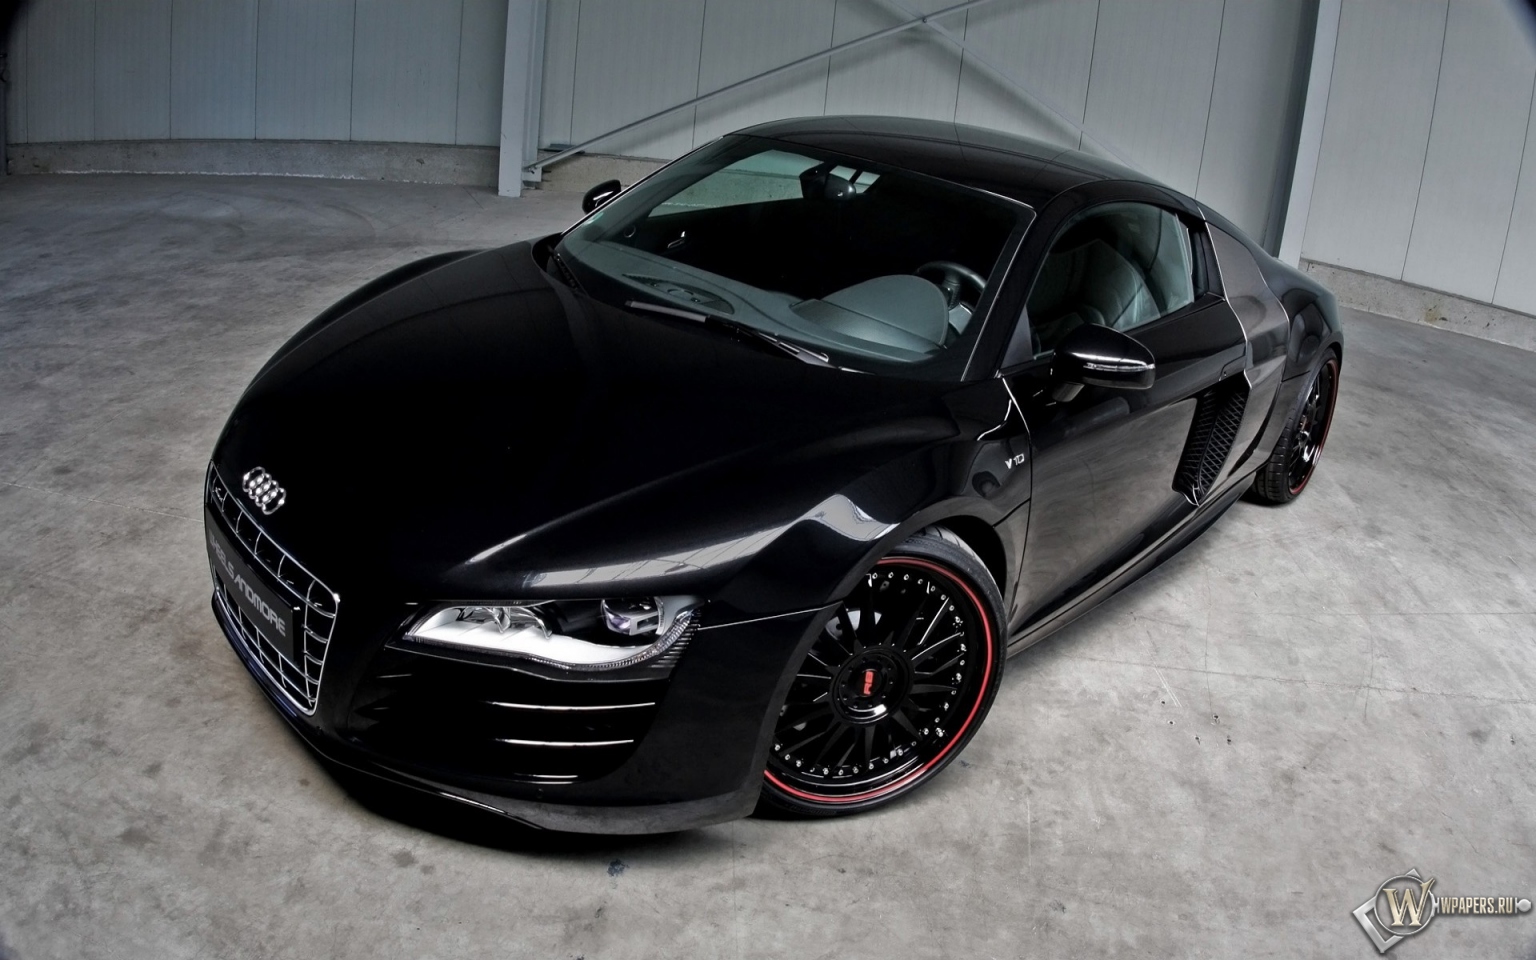 2011 Wheelsandmore Audi R8 V10 .6 - Front Angle Top 1536x960